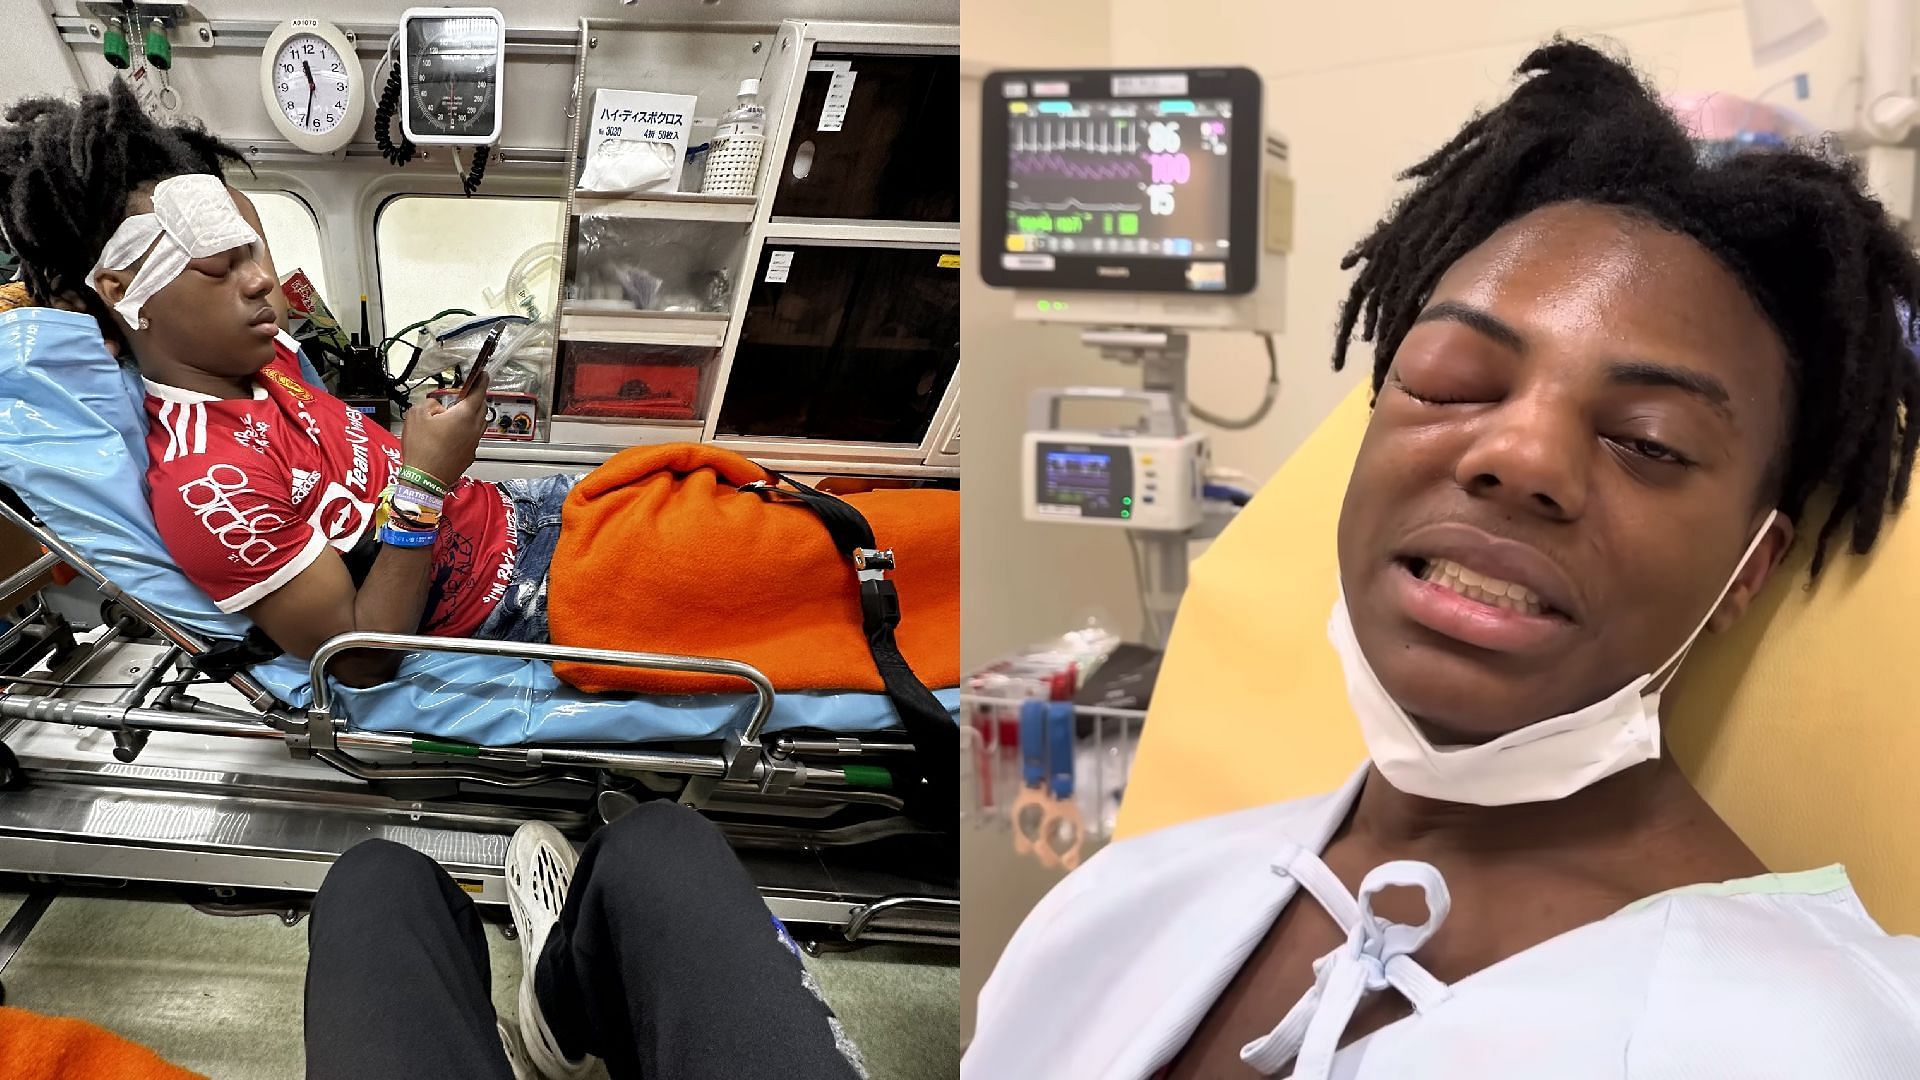 IShowSpeed gave another update in the hospital (REACTION) #cloutynaz #